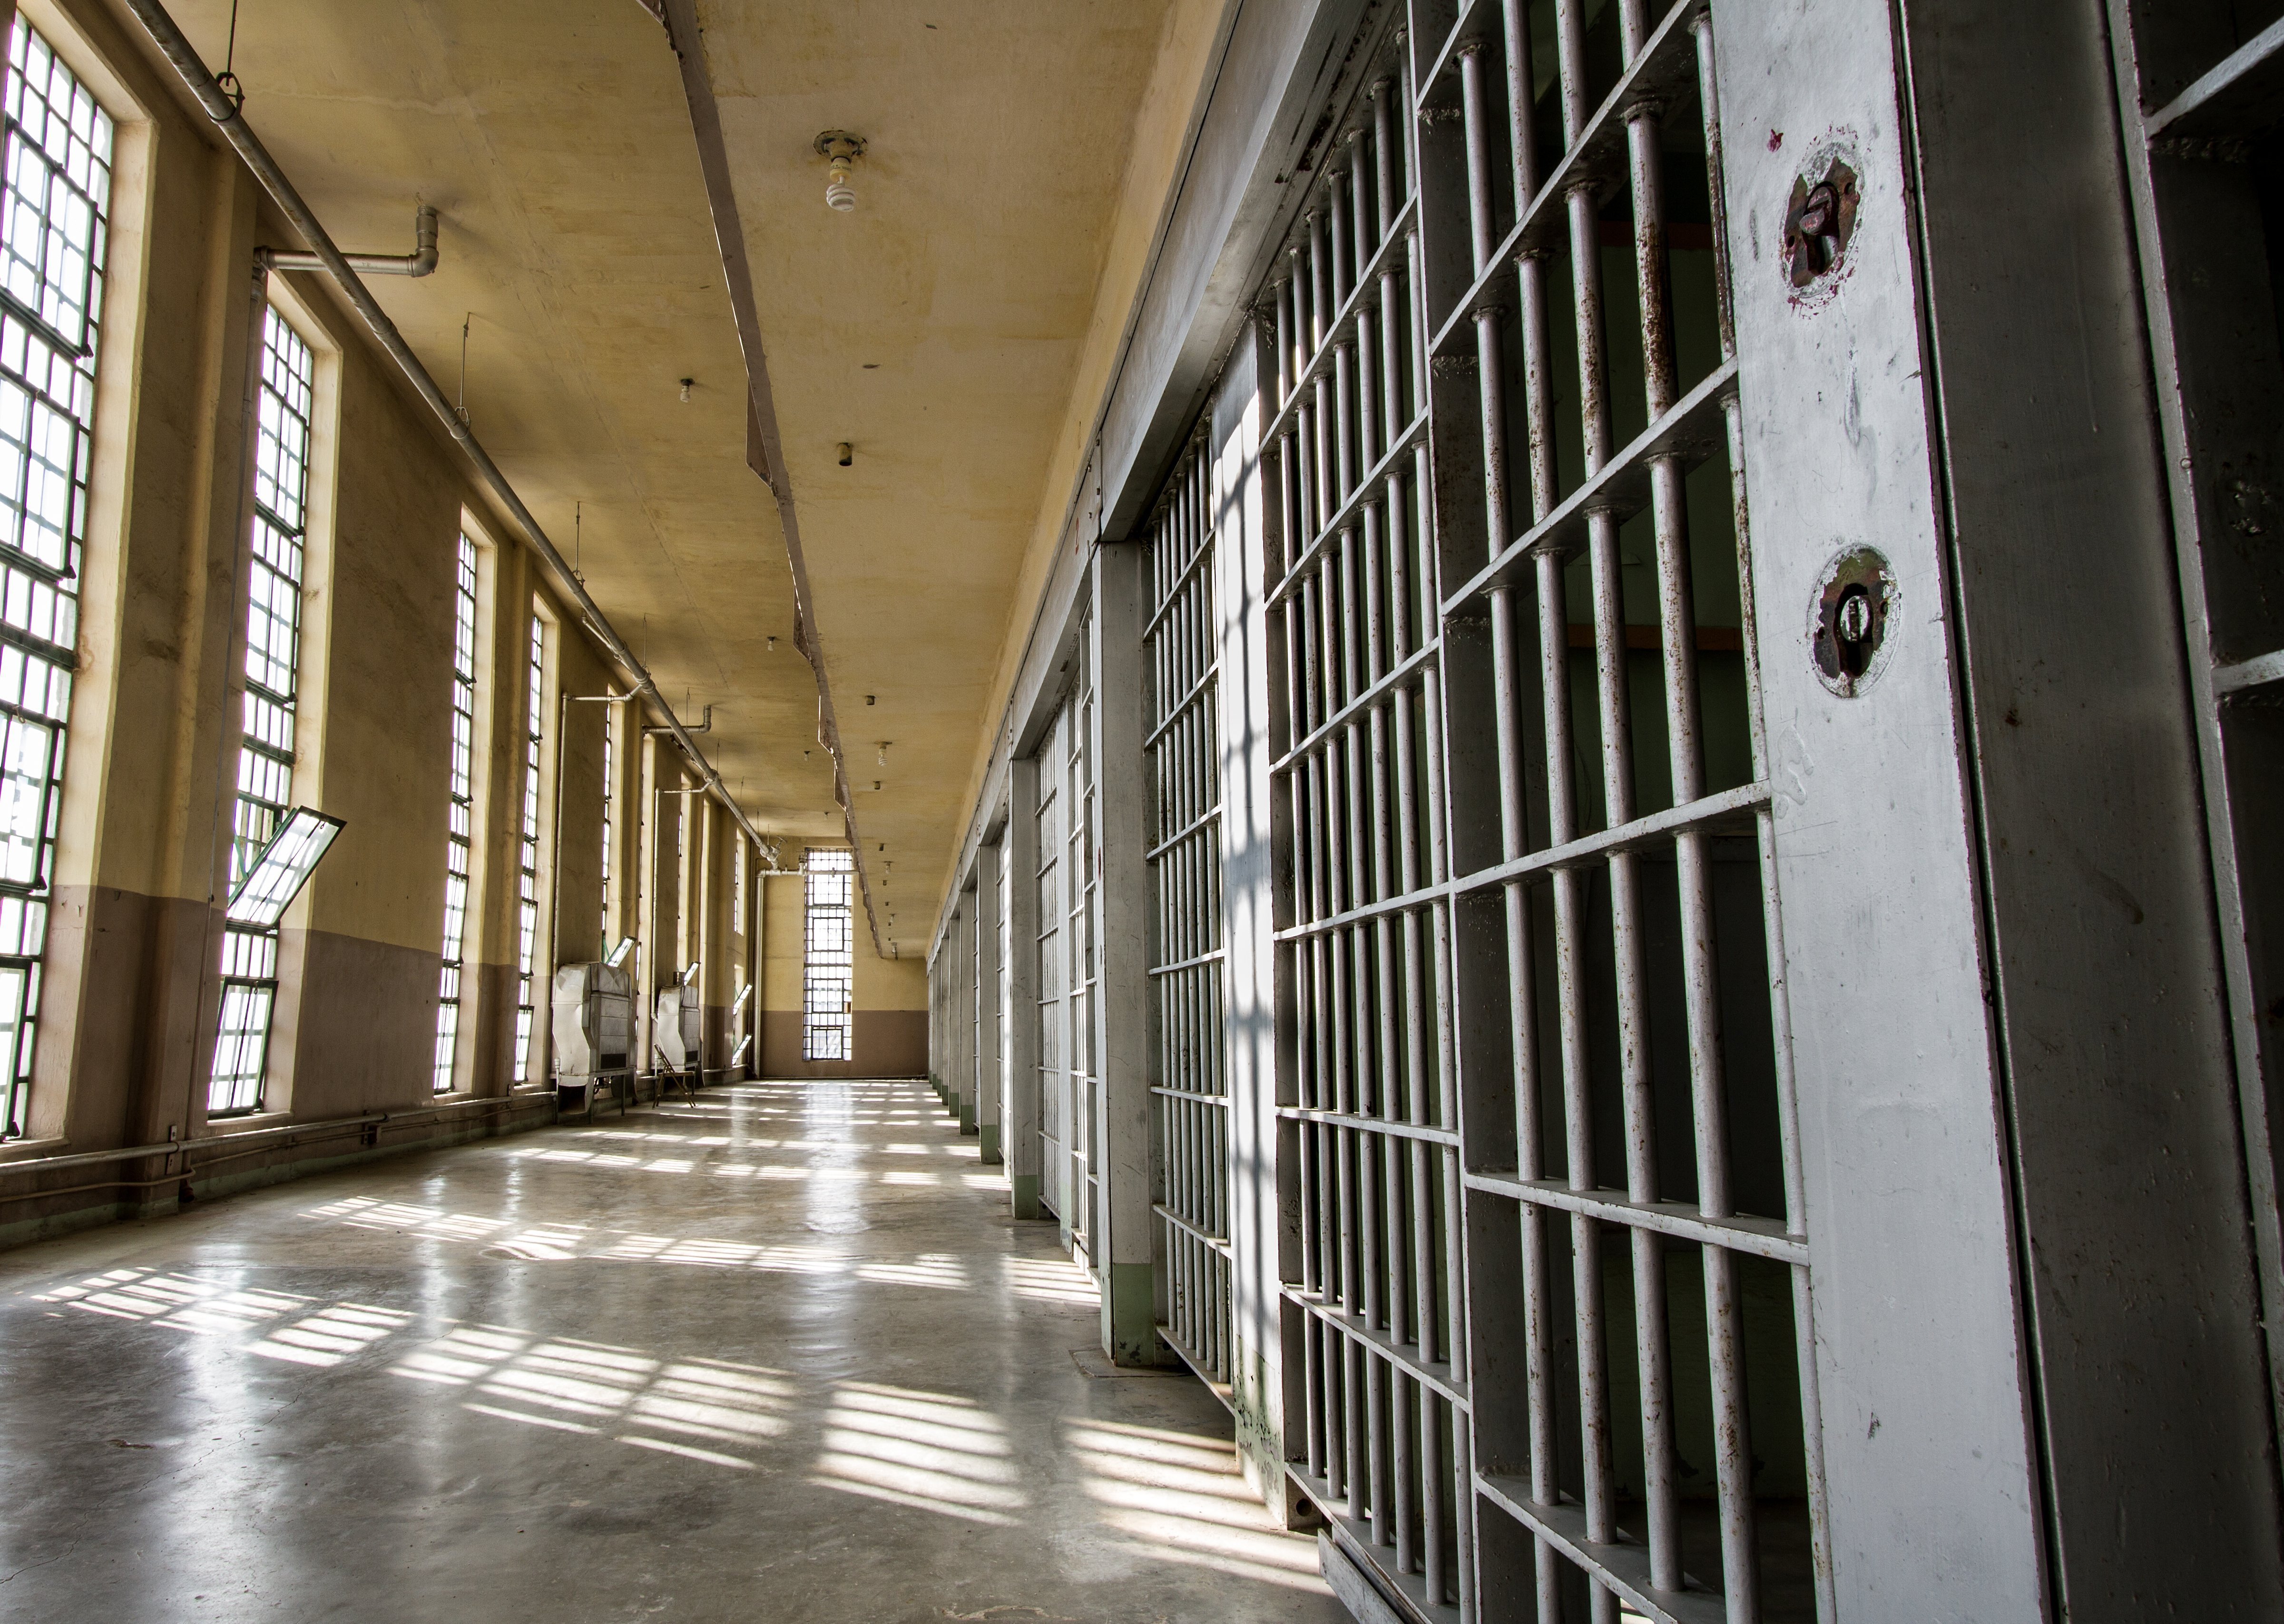 View of inside a prison institution | Photo: Getty Images